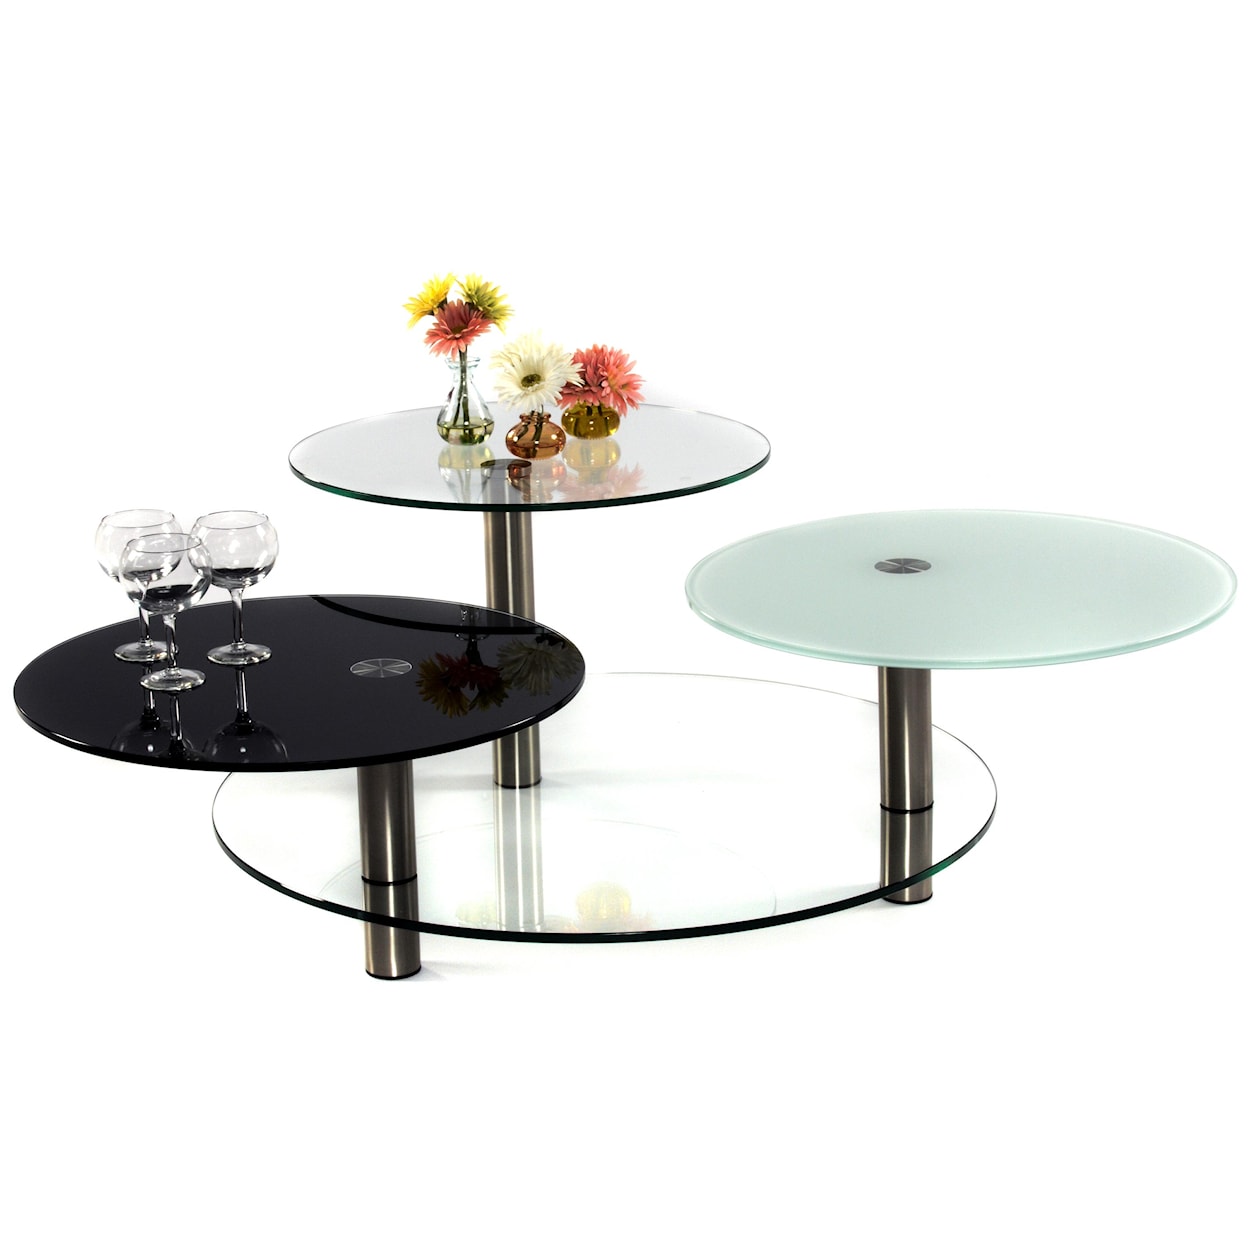 Chintaly Imports 7206 Glass Cocktail Table